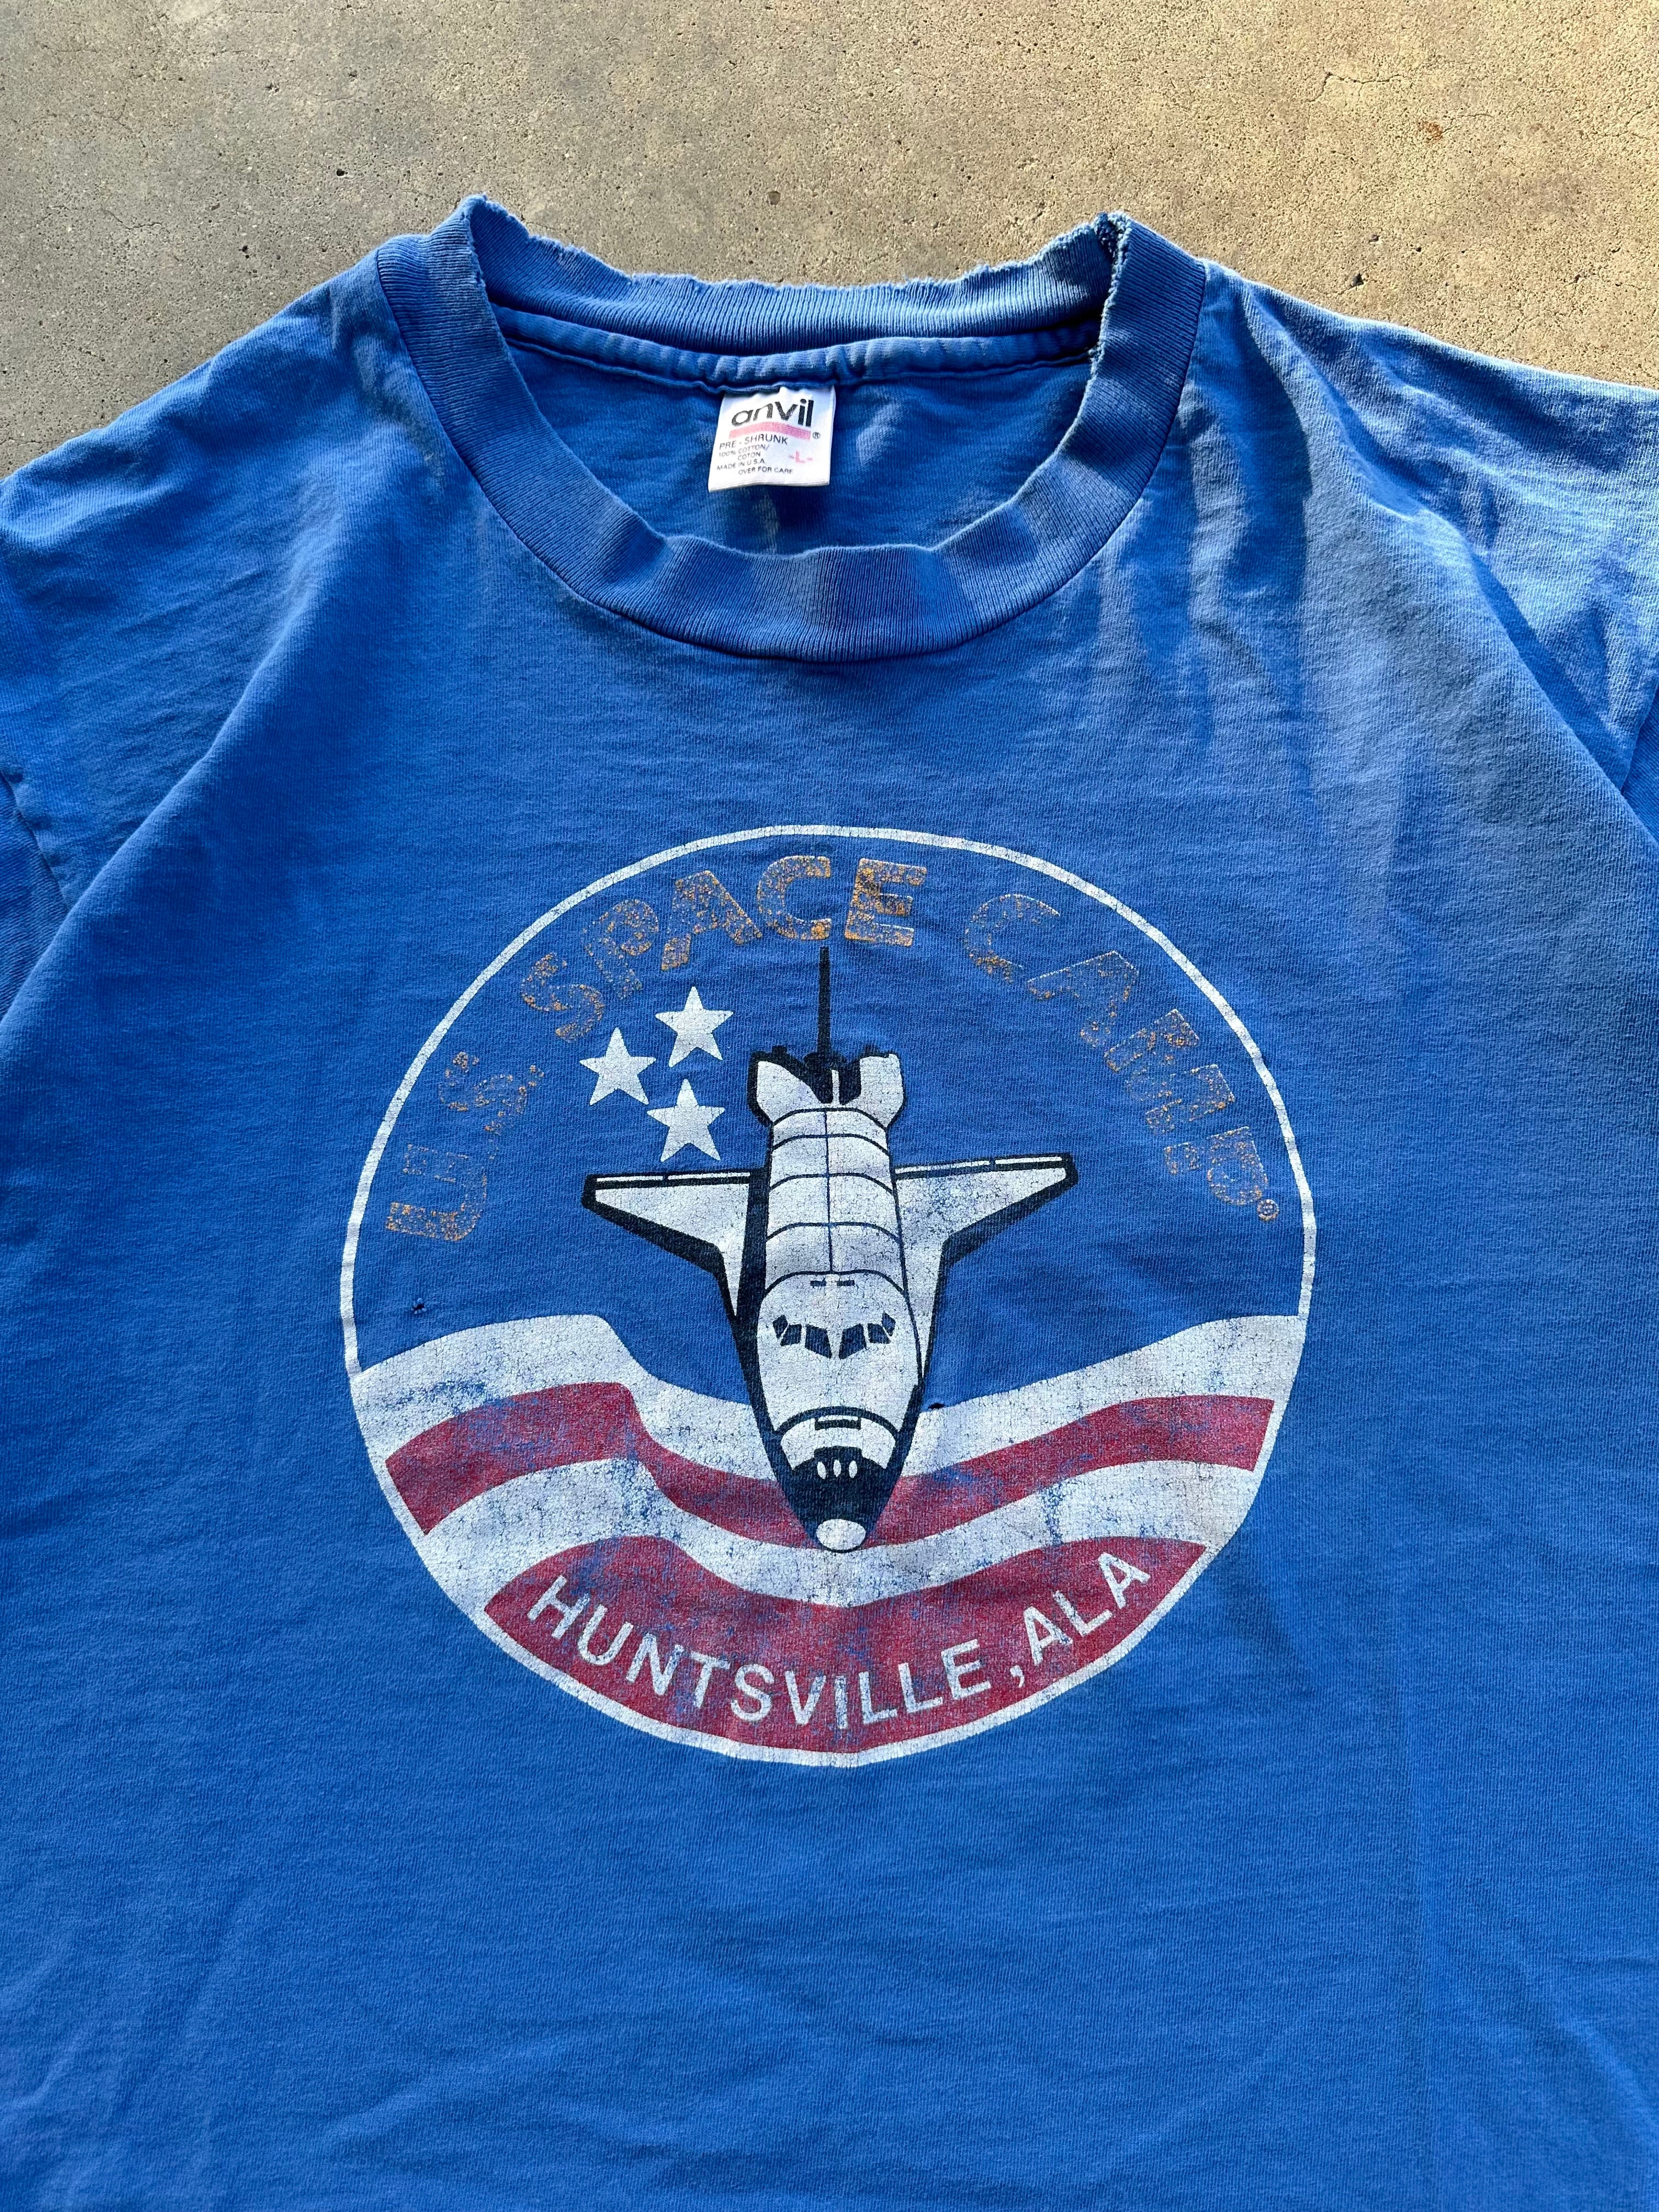 1990s Distressed US Space Camp T-Shirt (L)